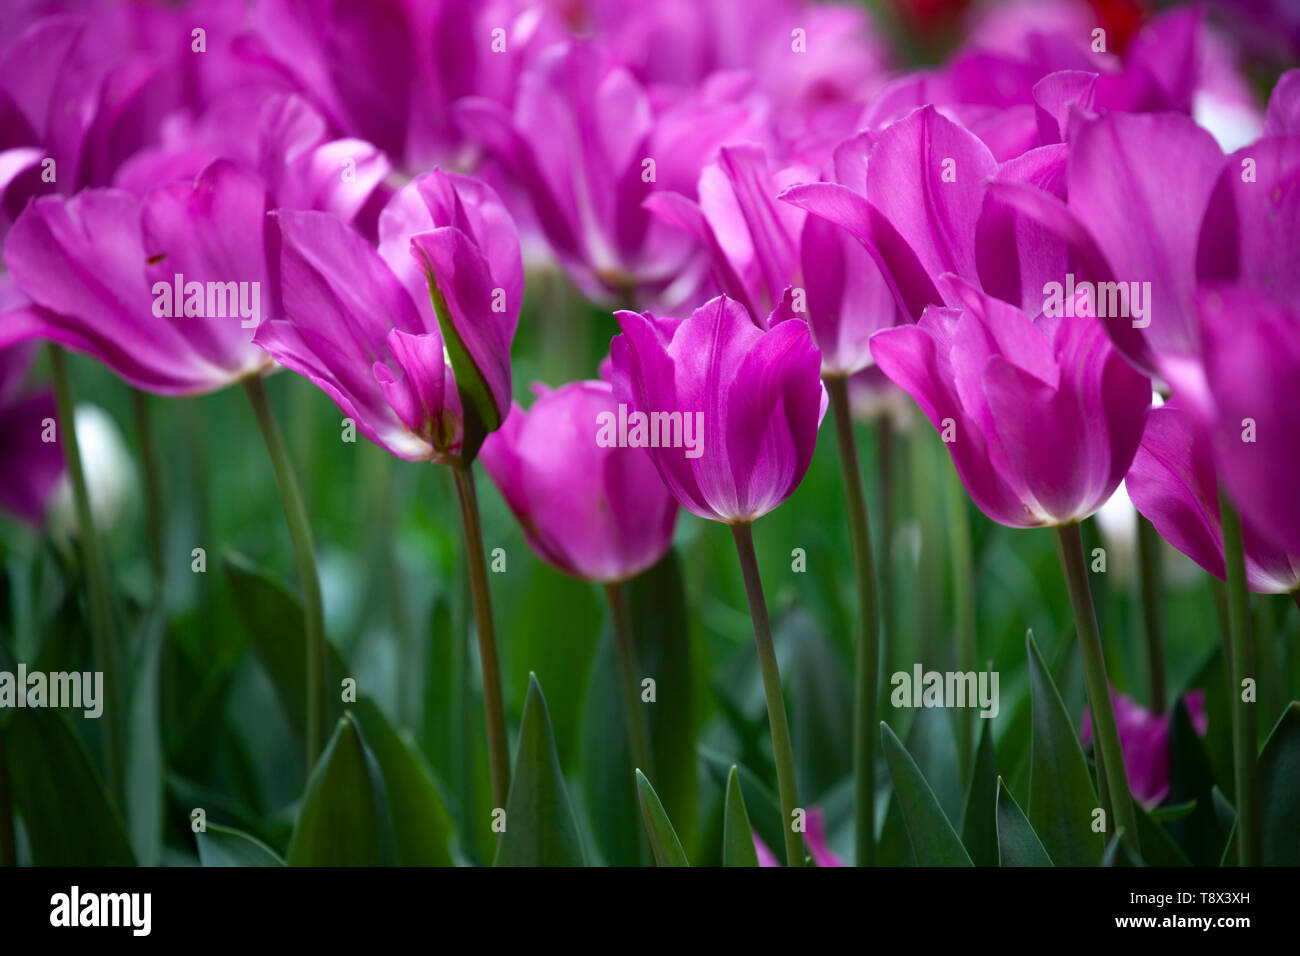 Many purple crimson tulips in the garden. The flowers have filled the frame. Stock Photo